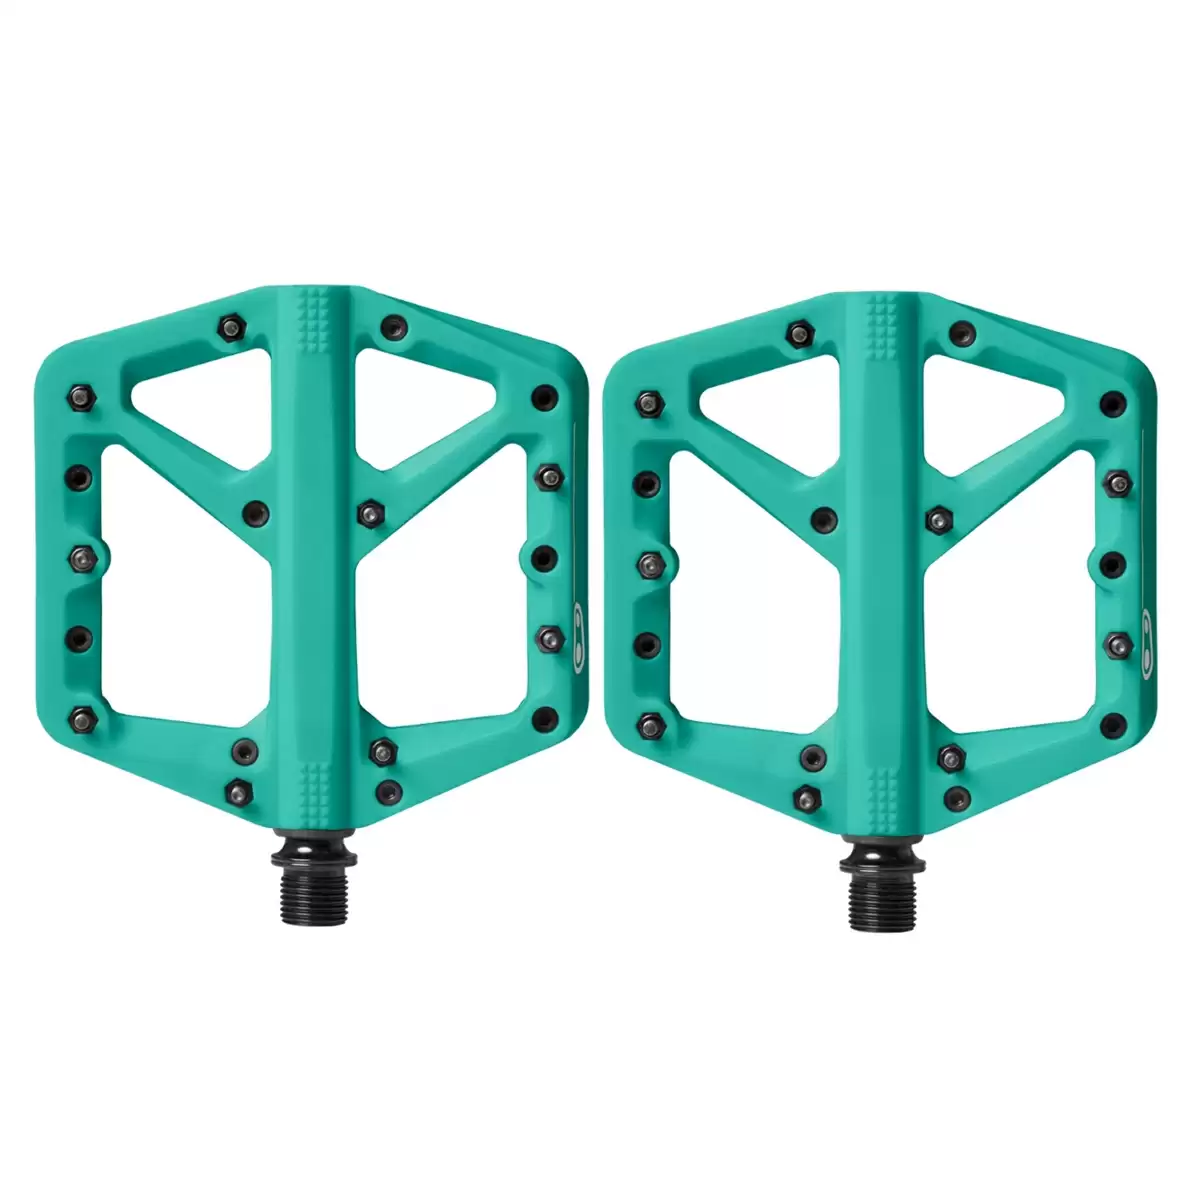 Pair of pedals Stamp 1 Small turquoise - image